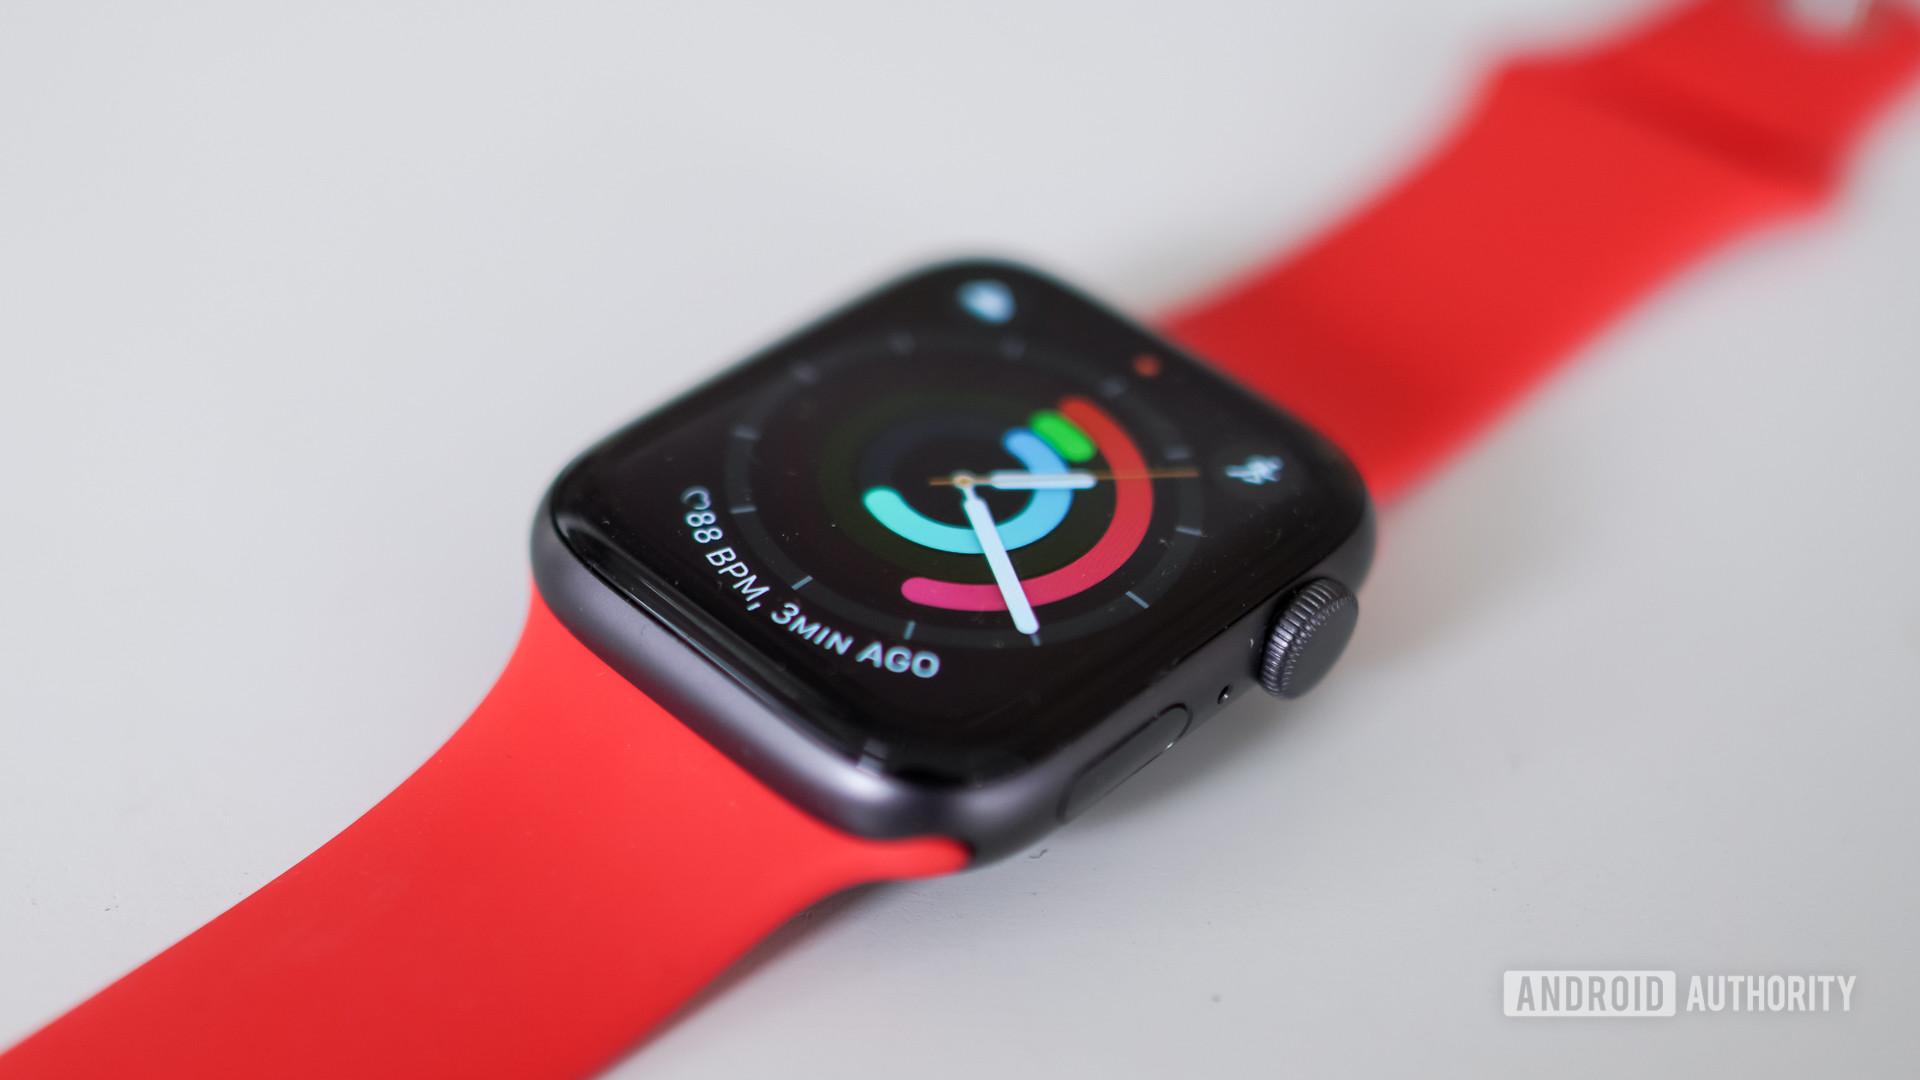 An Apple Watch SE in Space Gray with a a red band rests on a white table.